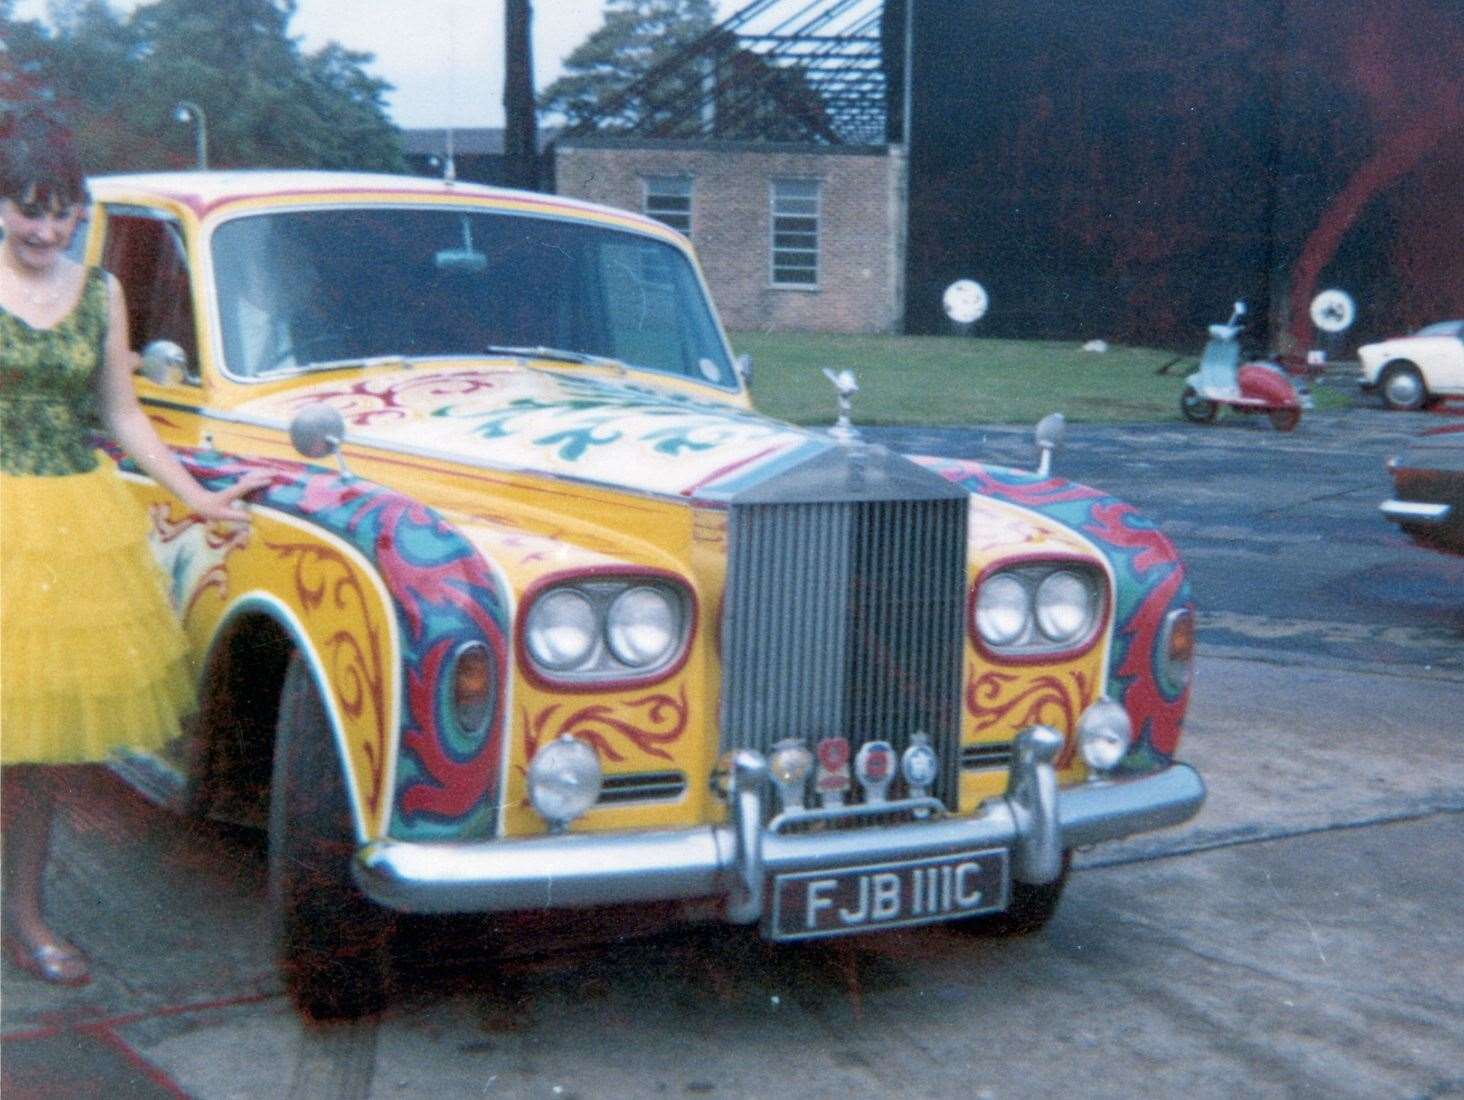 Jean Eames from Ditton poses in her dancing costume with John Lennon's Rolls Royce at West Malling airfield in 1967. Cynthia and Julian Lennon are in the back of the car. Submitted by Colin Eames